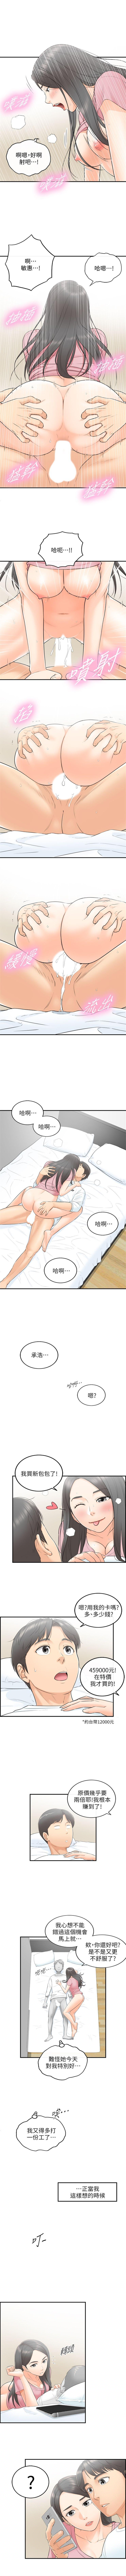 Buttfucking 正妹小主管 1-45 官方中文（連載中） Gay Orgy - Page 7